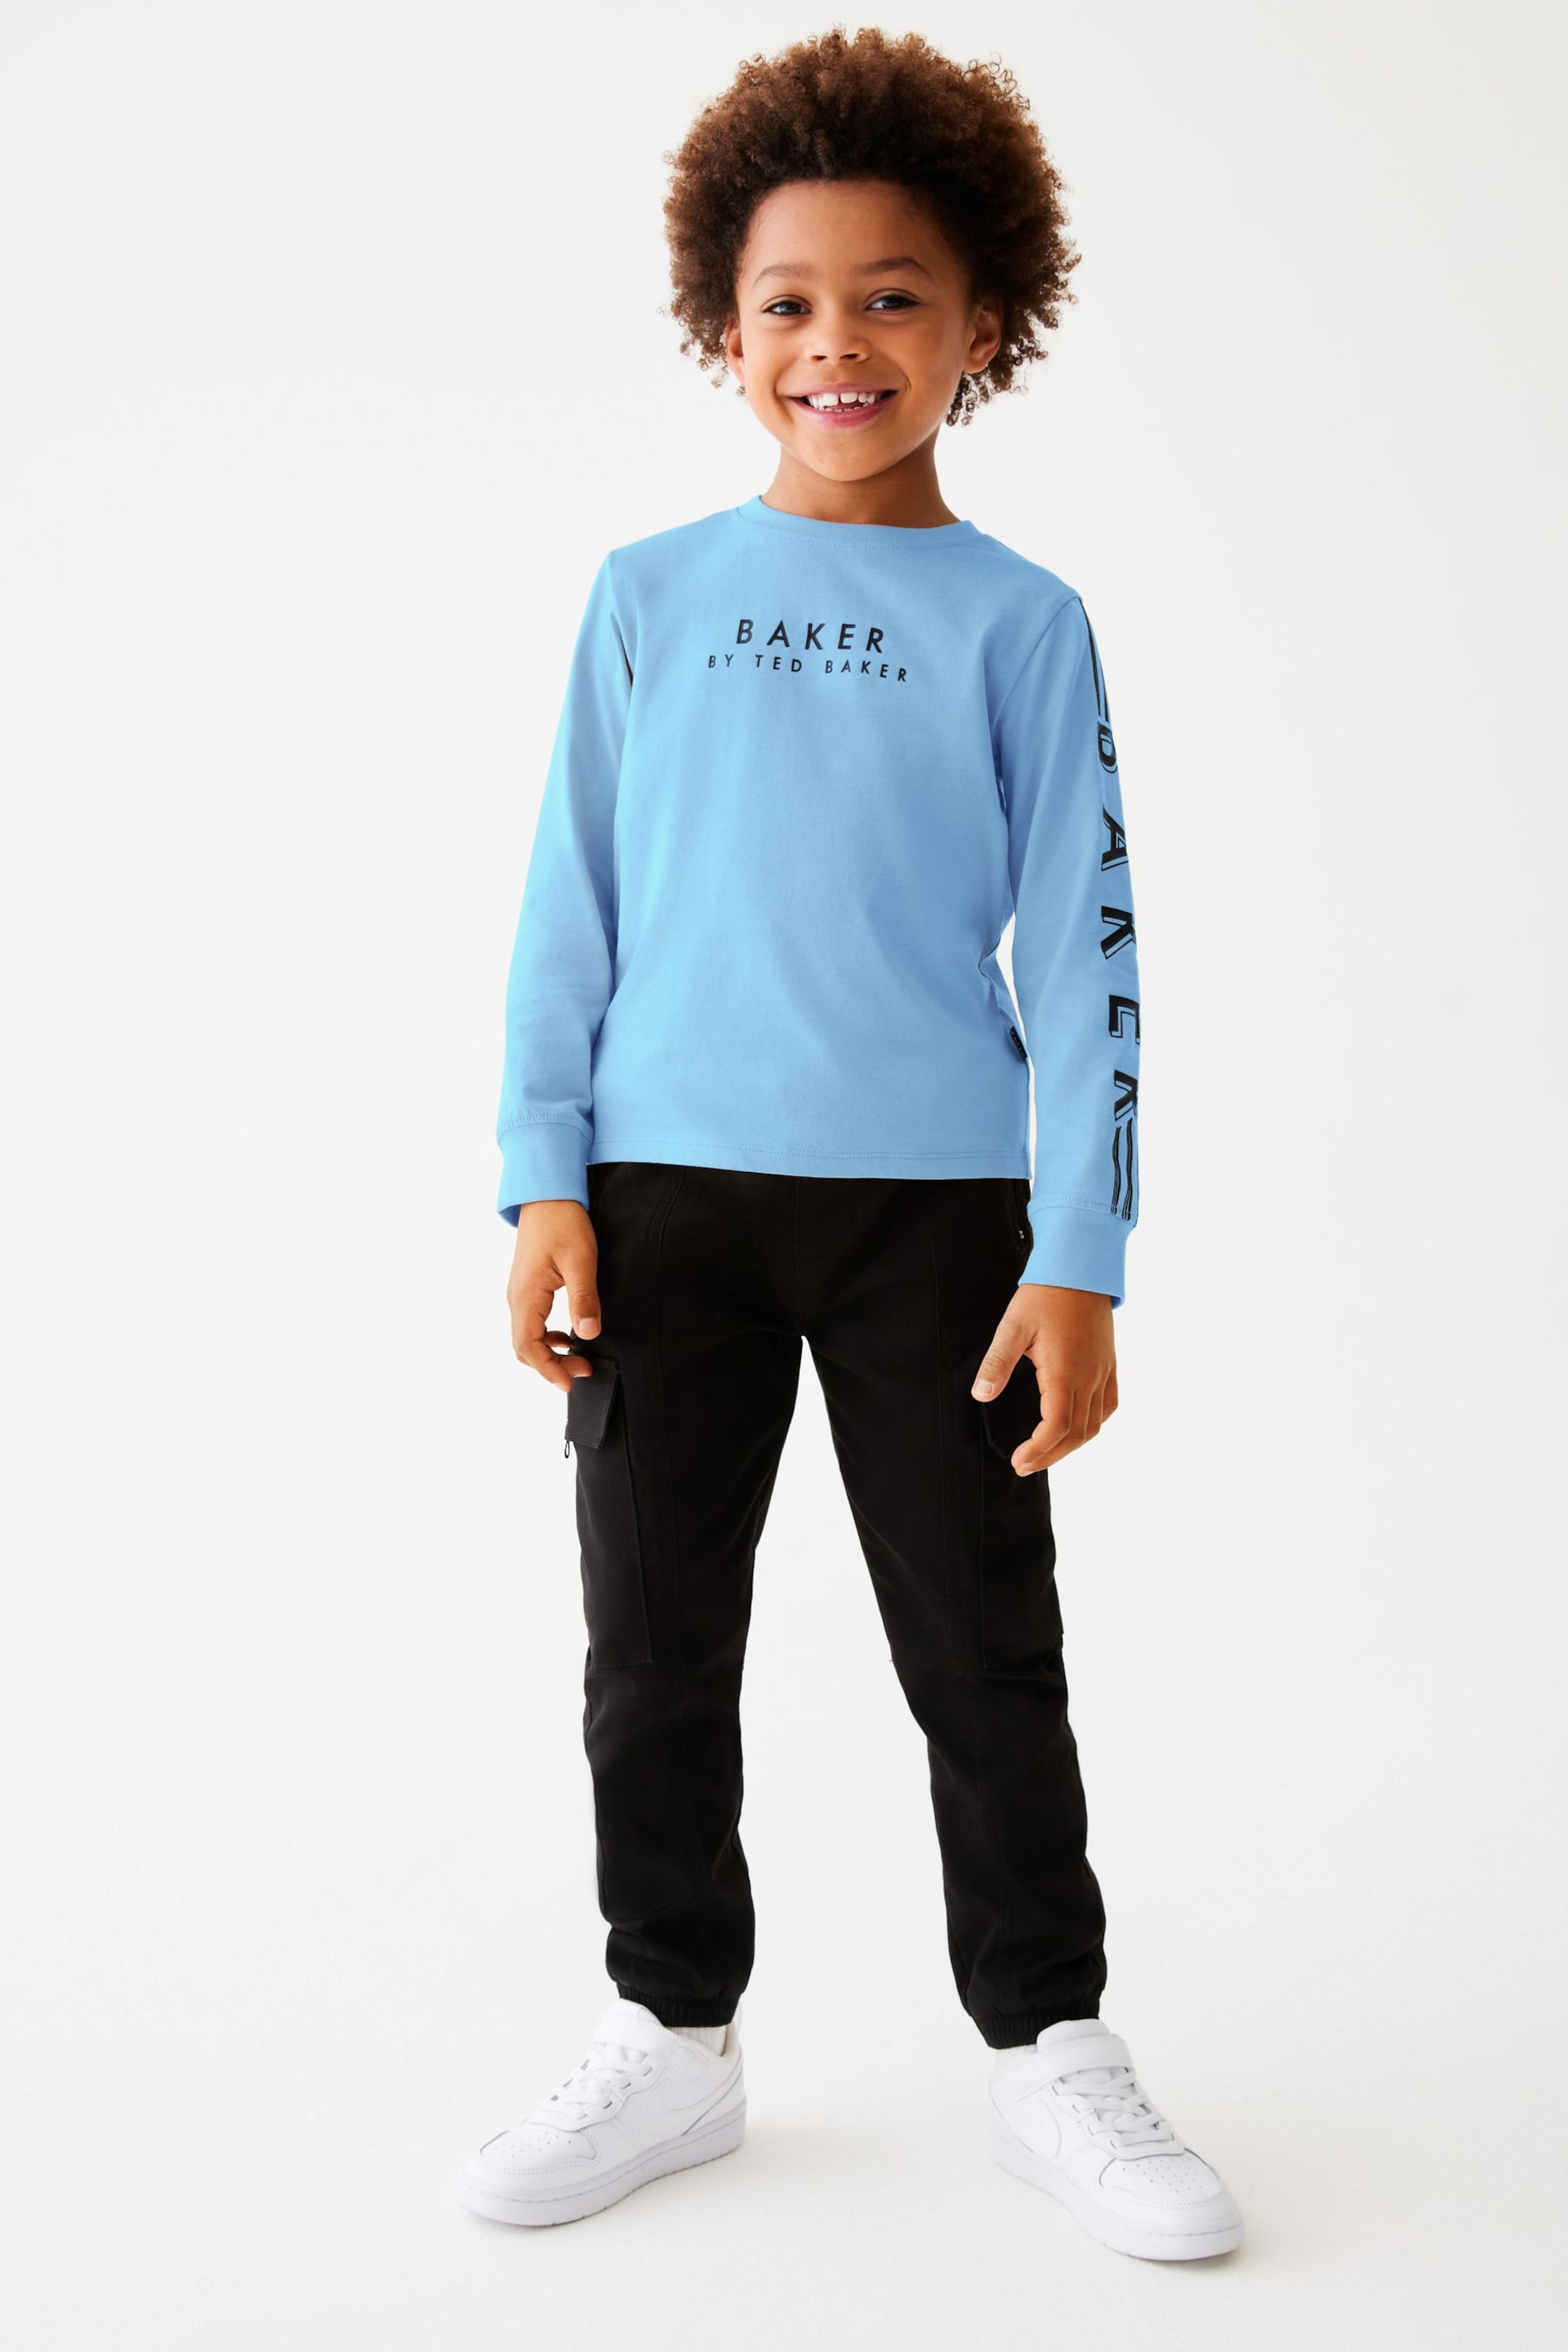 Baker by Ted Baker Long Sleeve T-Shirt - Image 1 of 14